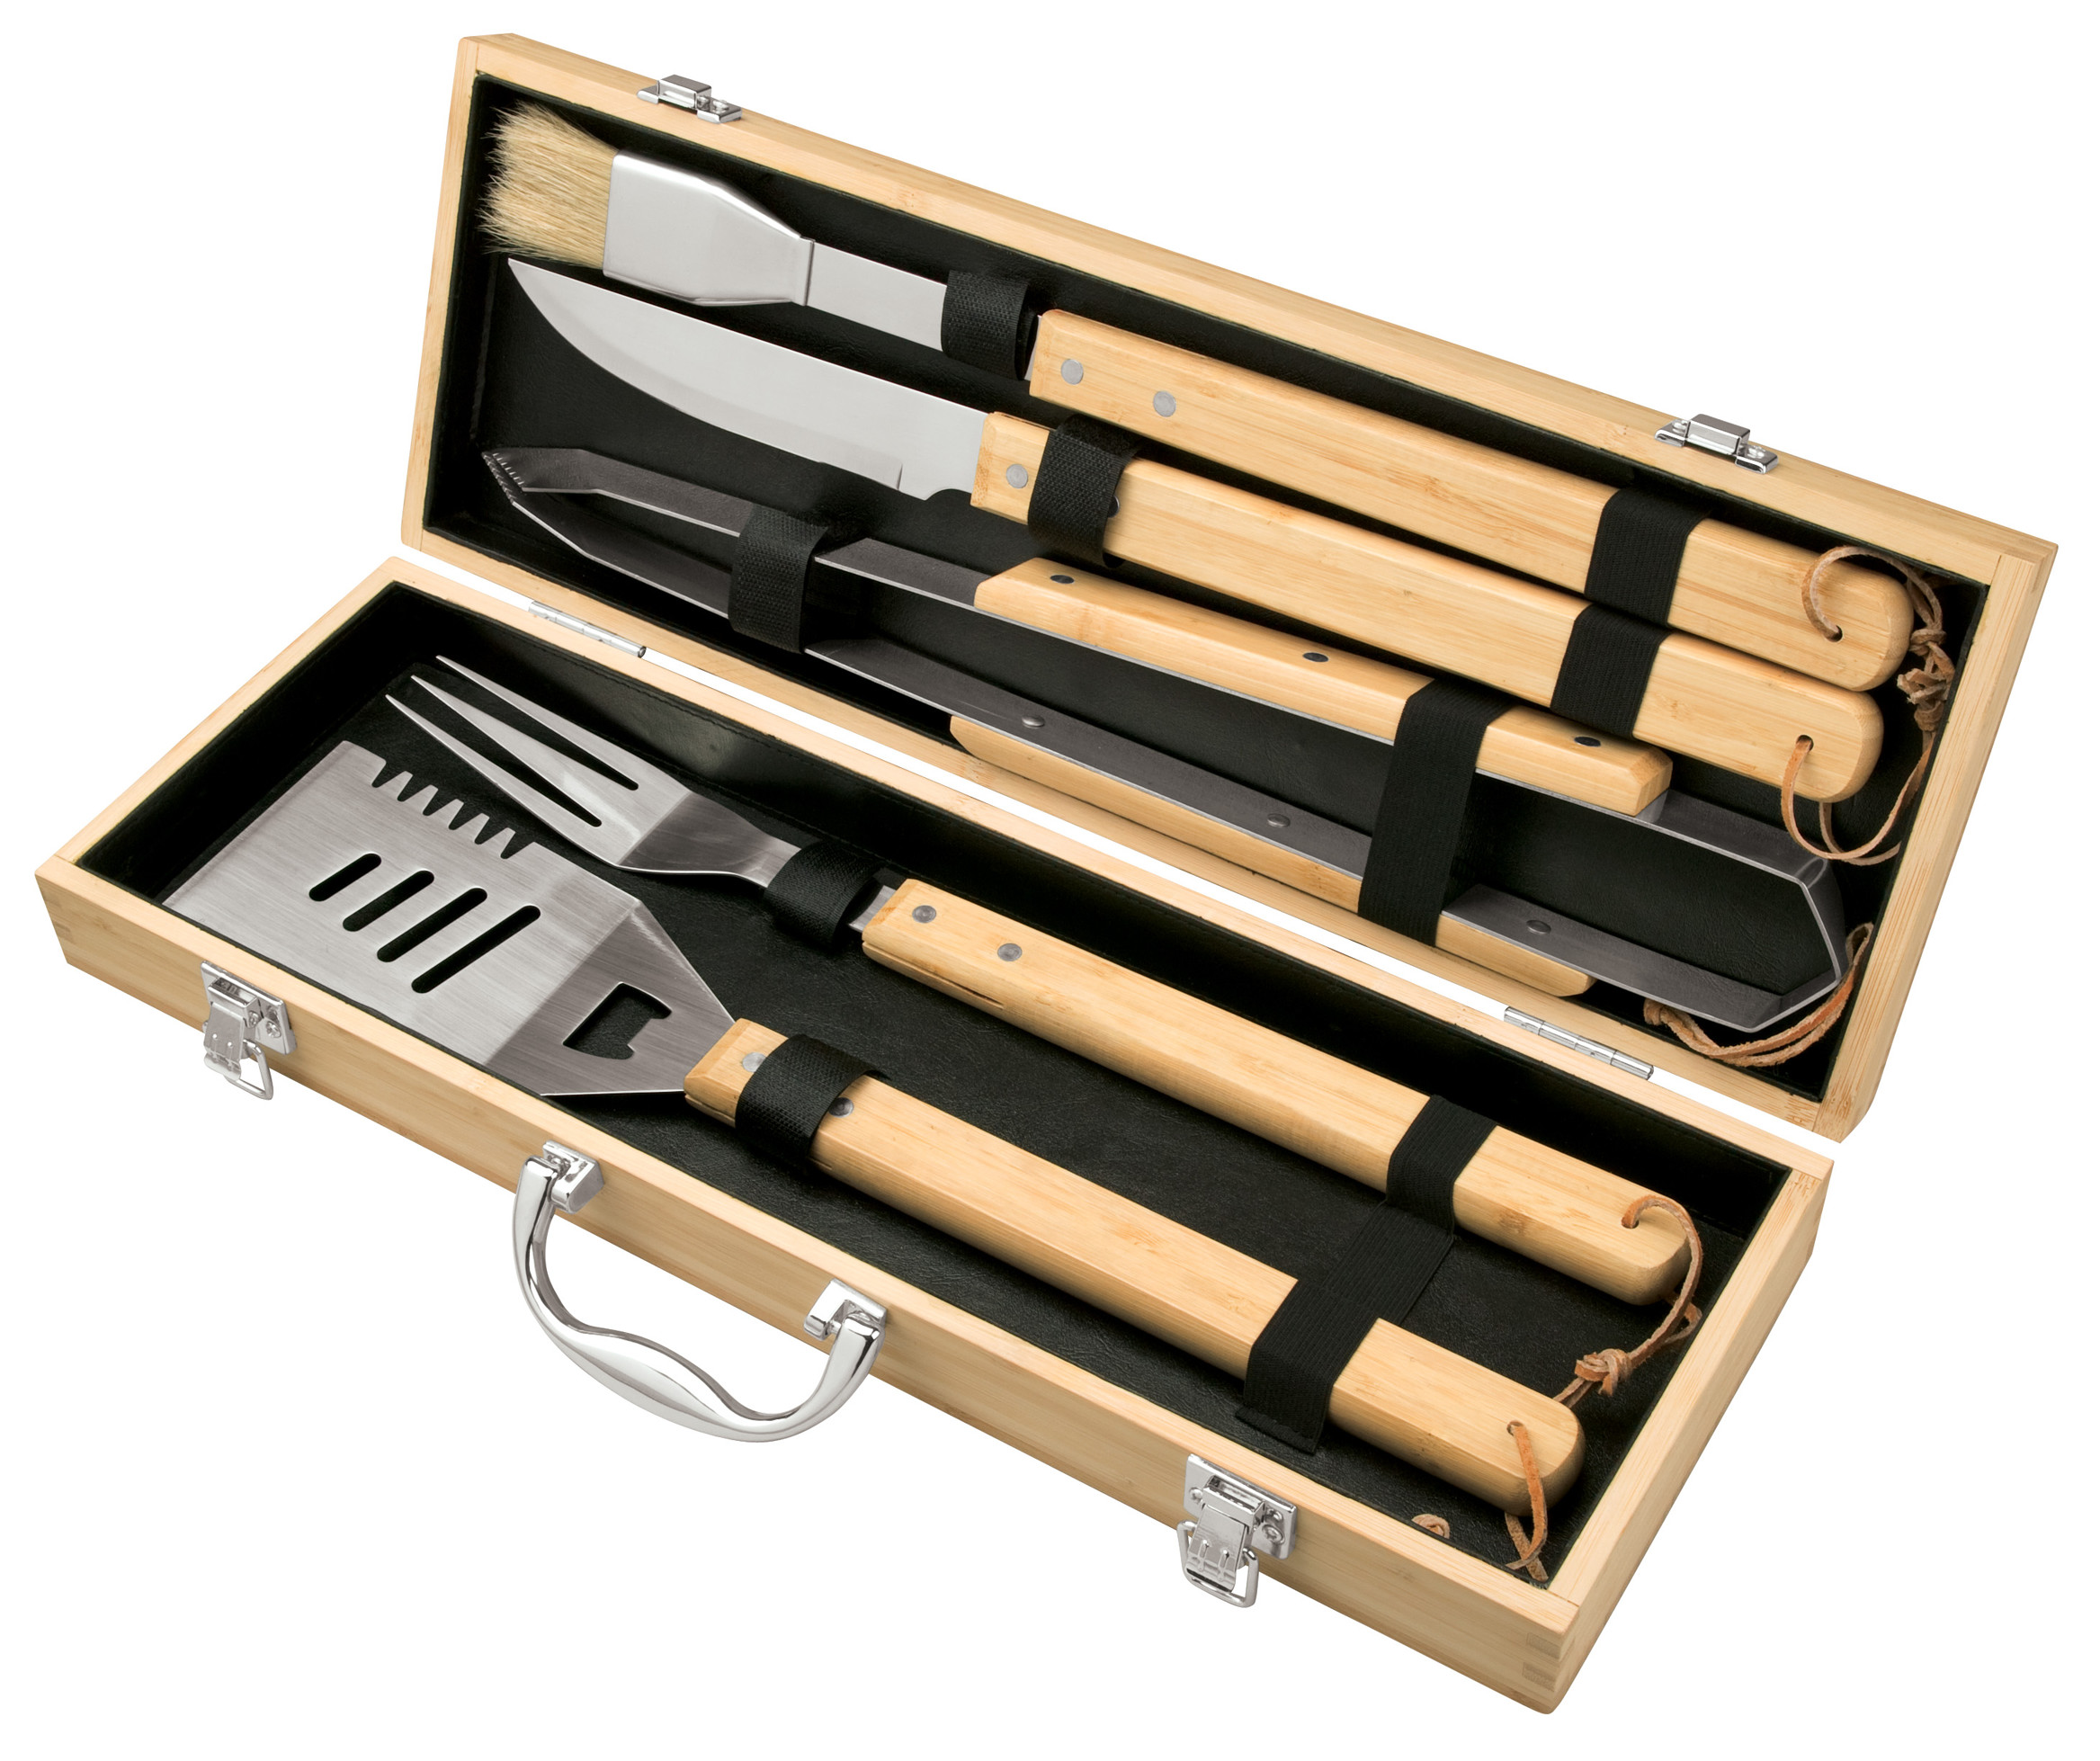 https://www.hansonellis.com/mm5/graphics/00000001/personalized-engraved-bbq-wood-stainless-steel-grill-set-wooden-box-log-69r99.jpg